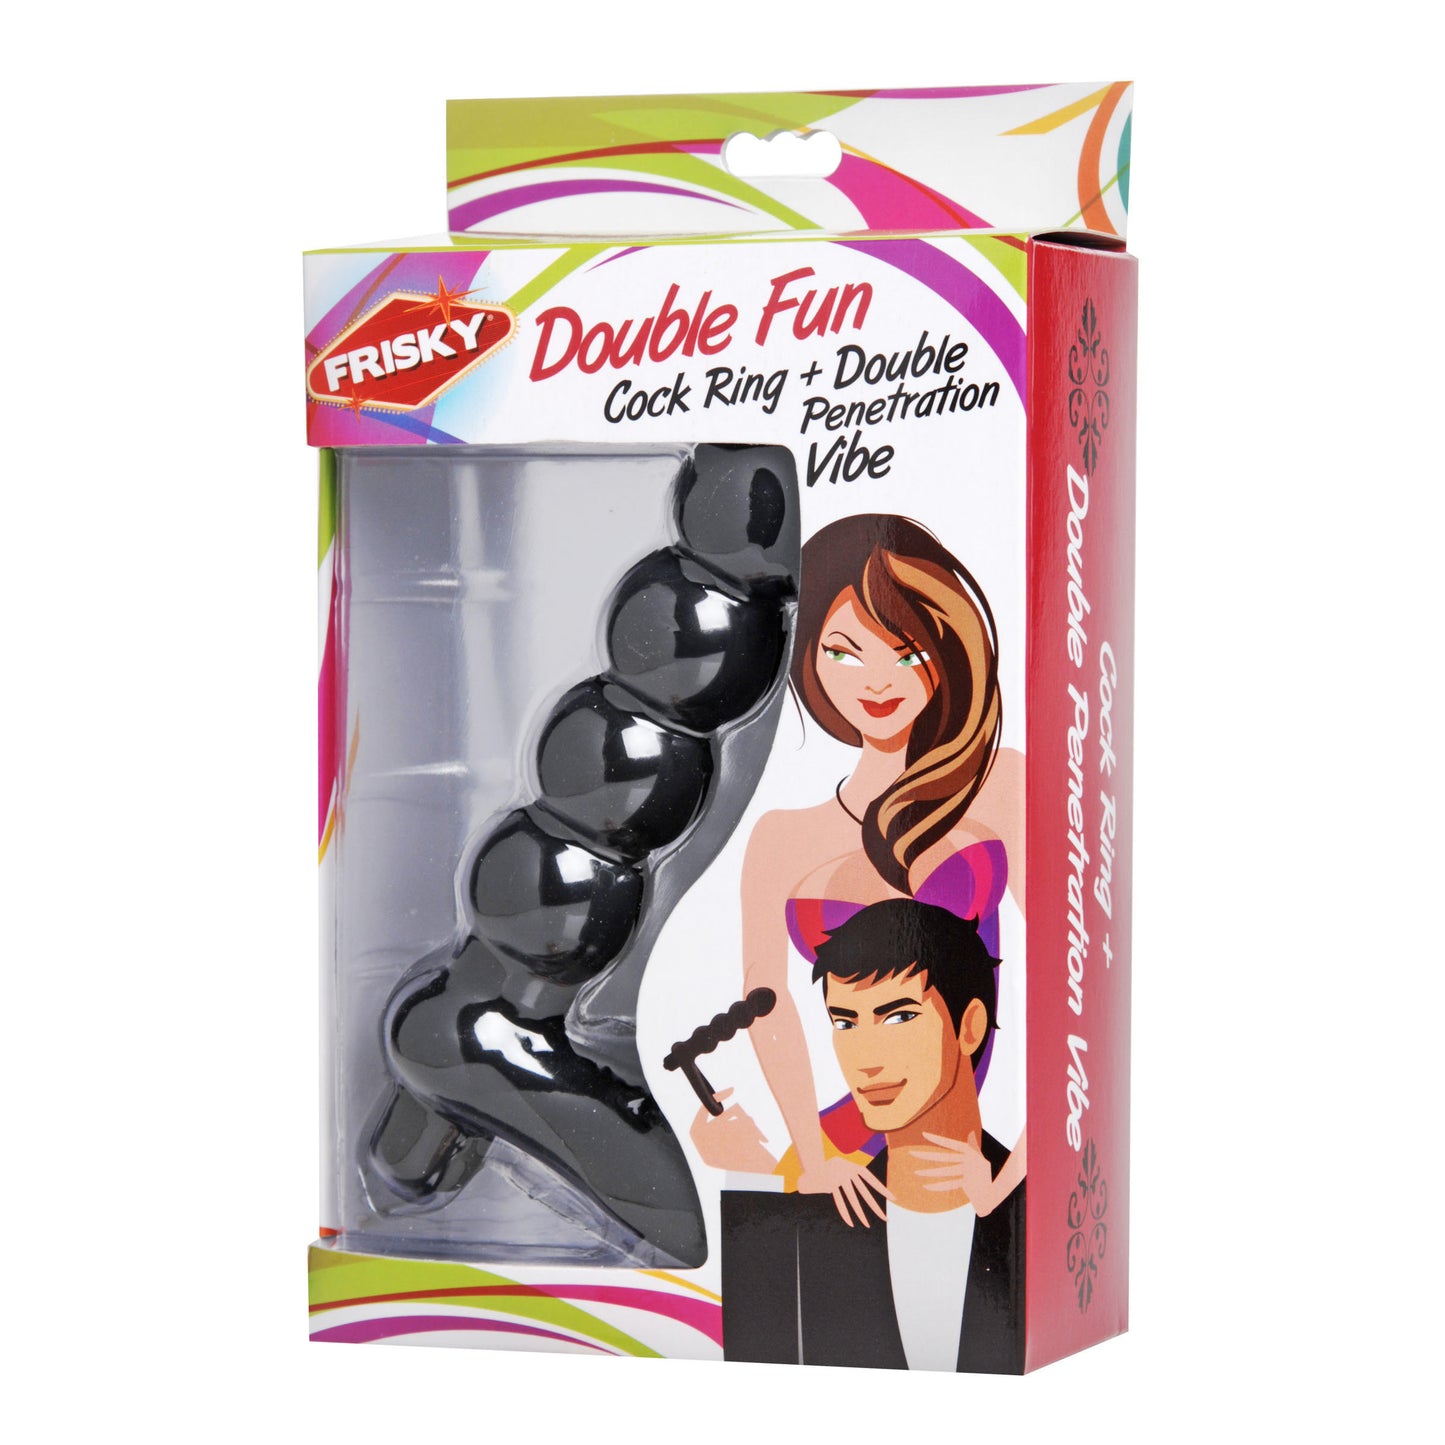 Double Fun Cock Ring With Double Penetration Vibe